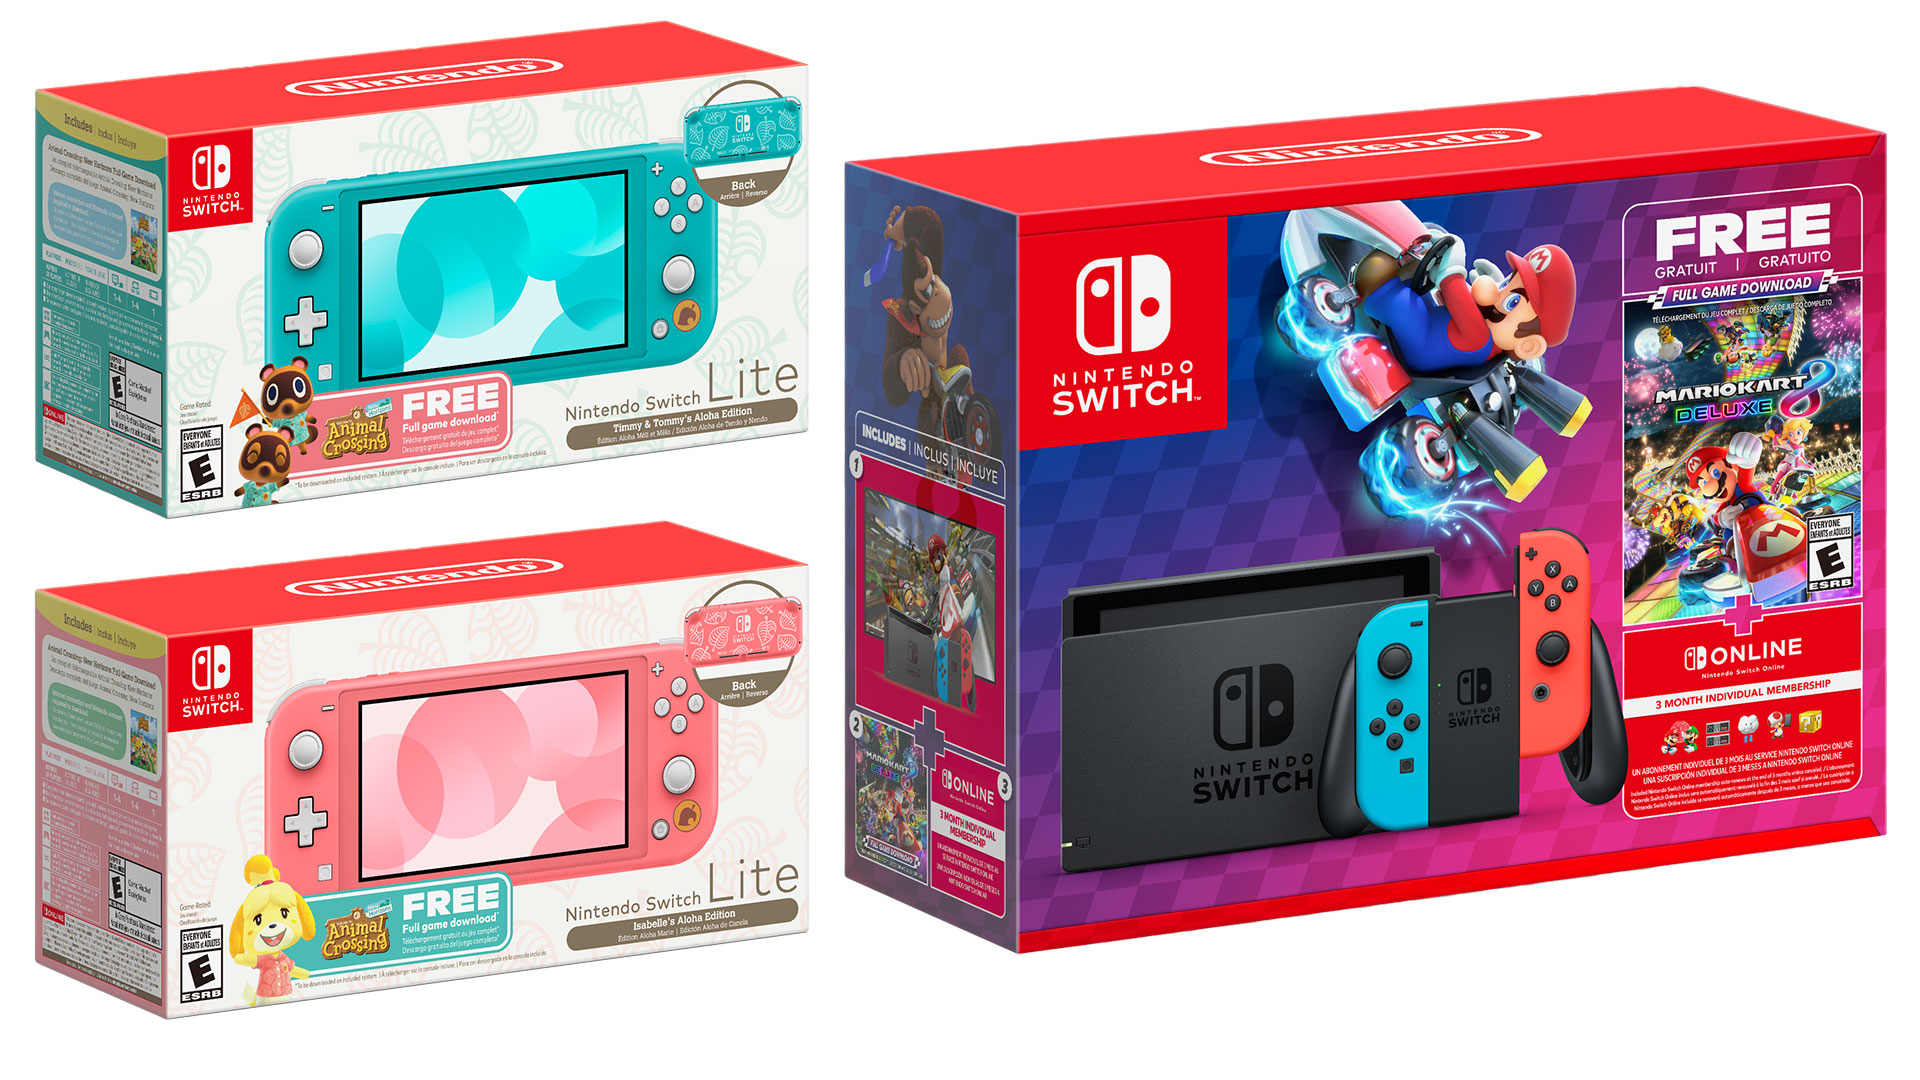 Nintendo has announced new Switch and Switch Lite bundles